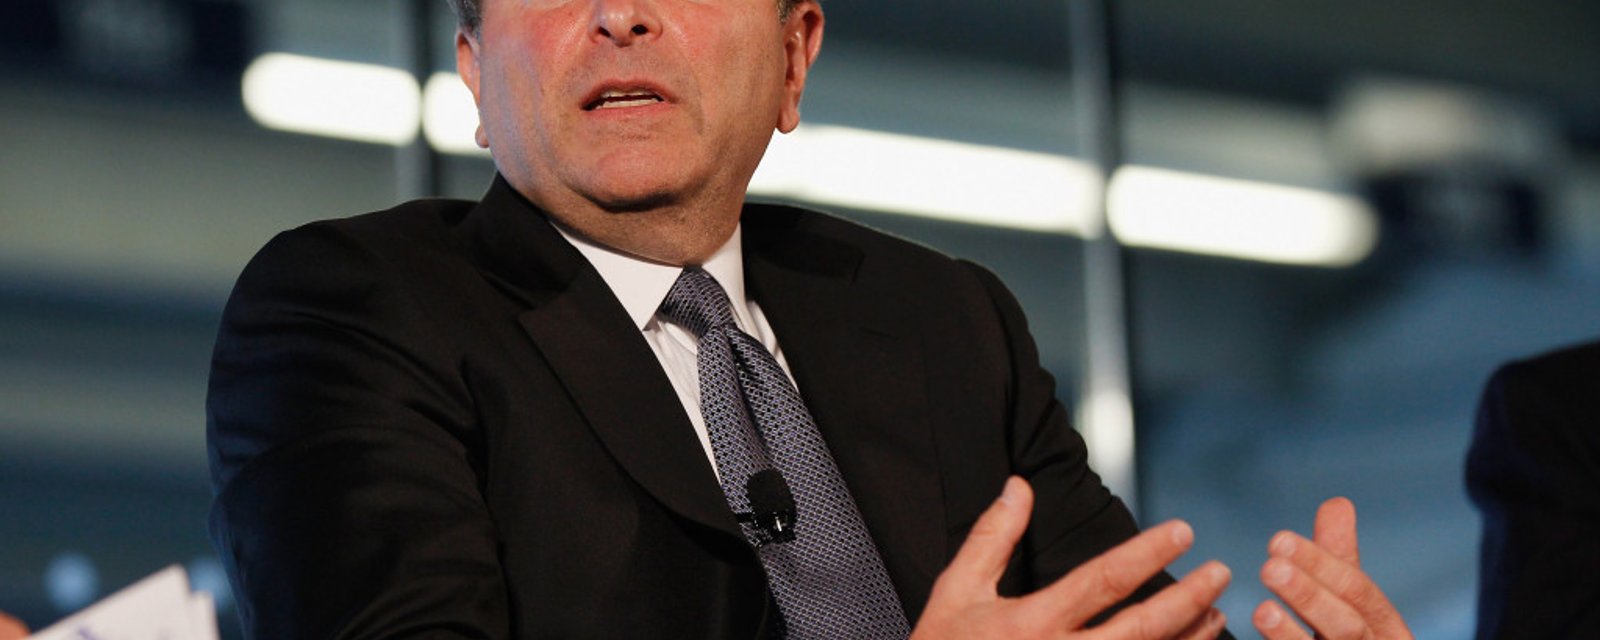 Gary Bettman has message to fans who fear season will be canceled 